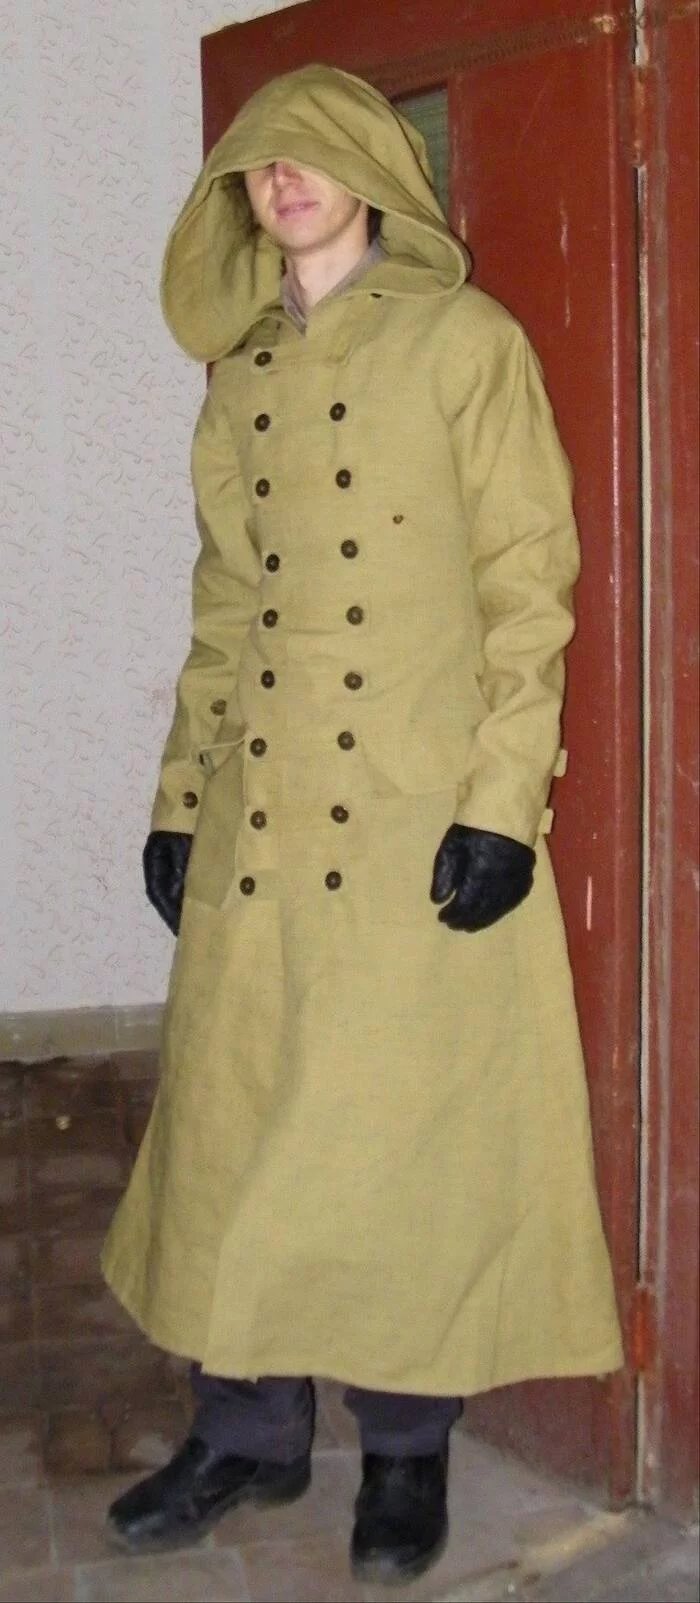 Once I modeled such a coat, a familiar seamstress sewed, it turned out something a la stalker-arcanum - My, Coat, Stalker, Fallout, Costume, Halloween costume, Arcanum, Kiev, Cloak, Hoodie, Horse in coat, Cosplay, Longpost, 